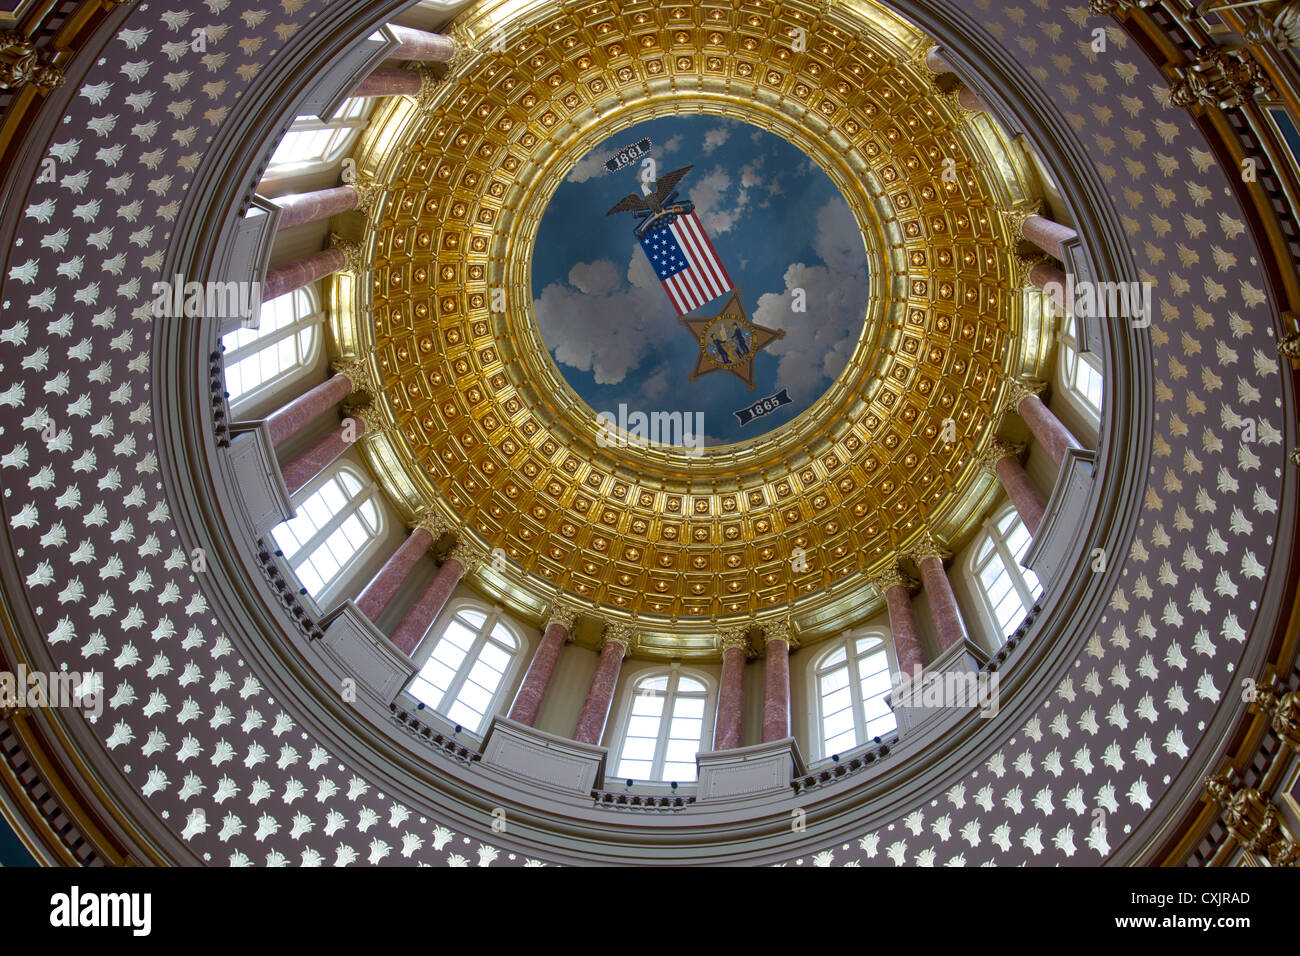 Rotunda dome ceiling inside the Iowa state capitol building or statehouse in Des Moines Stock Photo